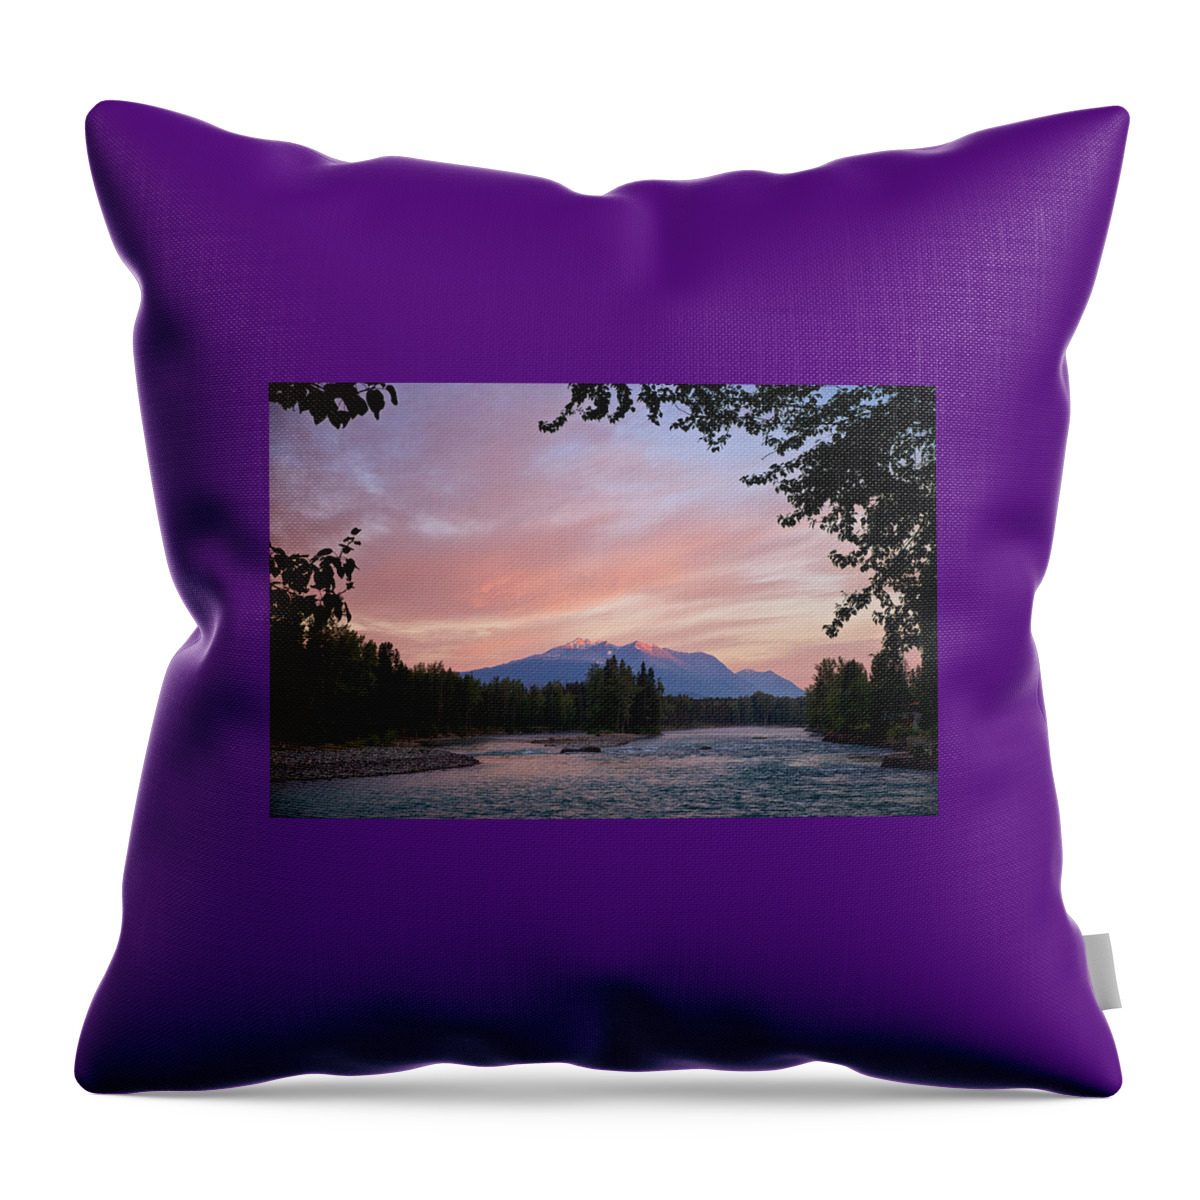 Bulkley River Throw Pillow featuring the photograph Hudson Bay Mountain British Columbia by Mary Lee Dereske